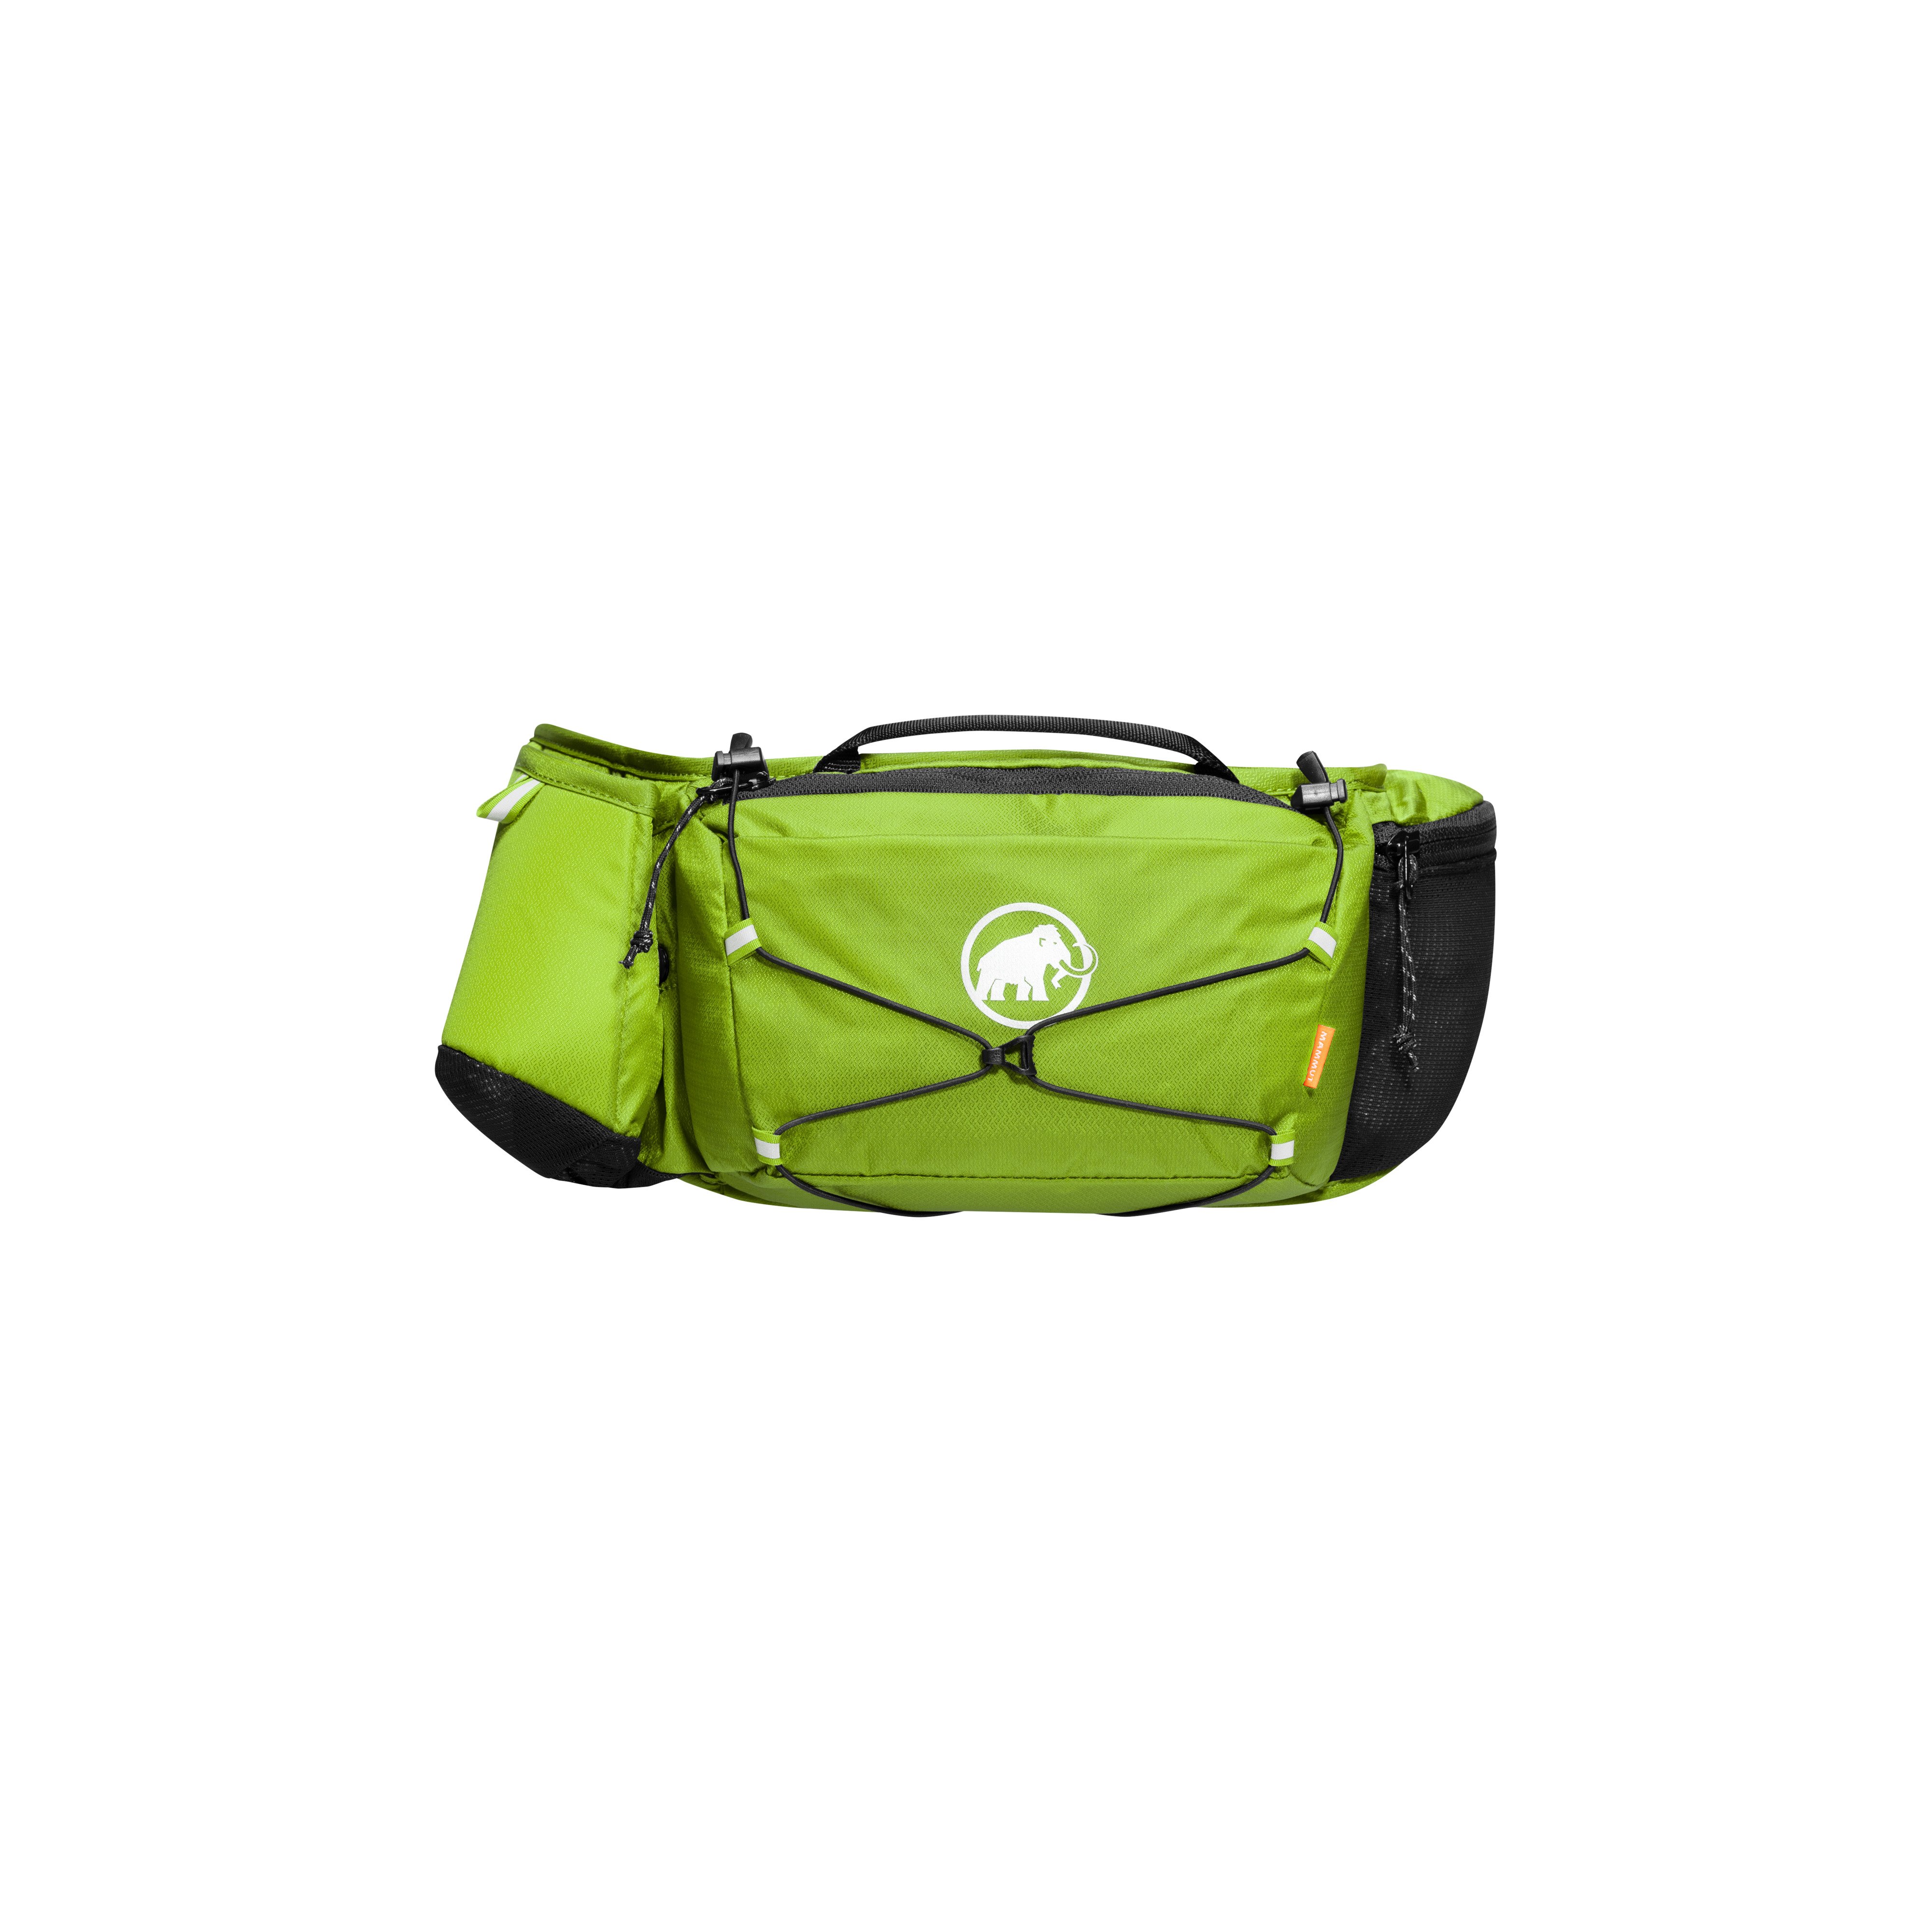 Lithium Waistpack - highlime, 3 L product image